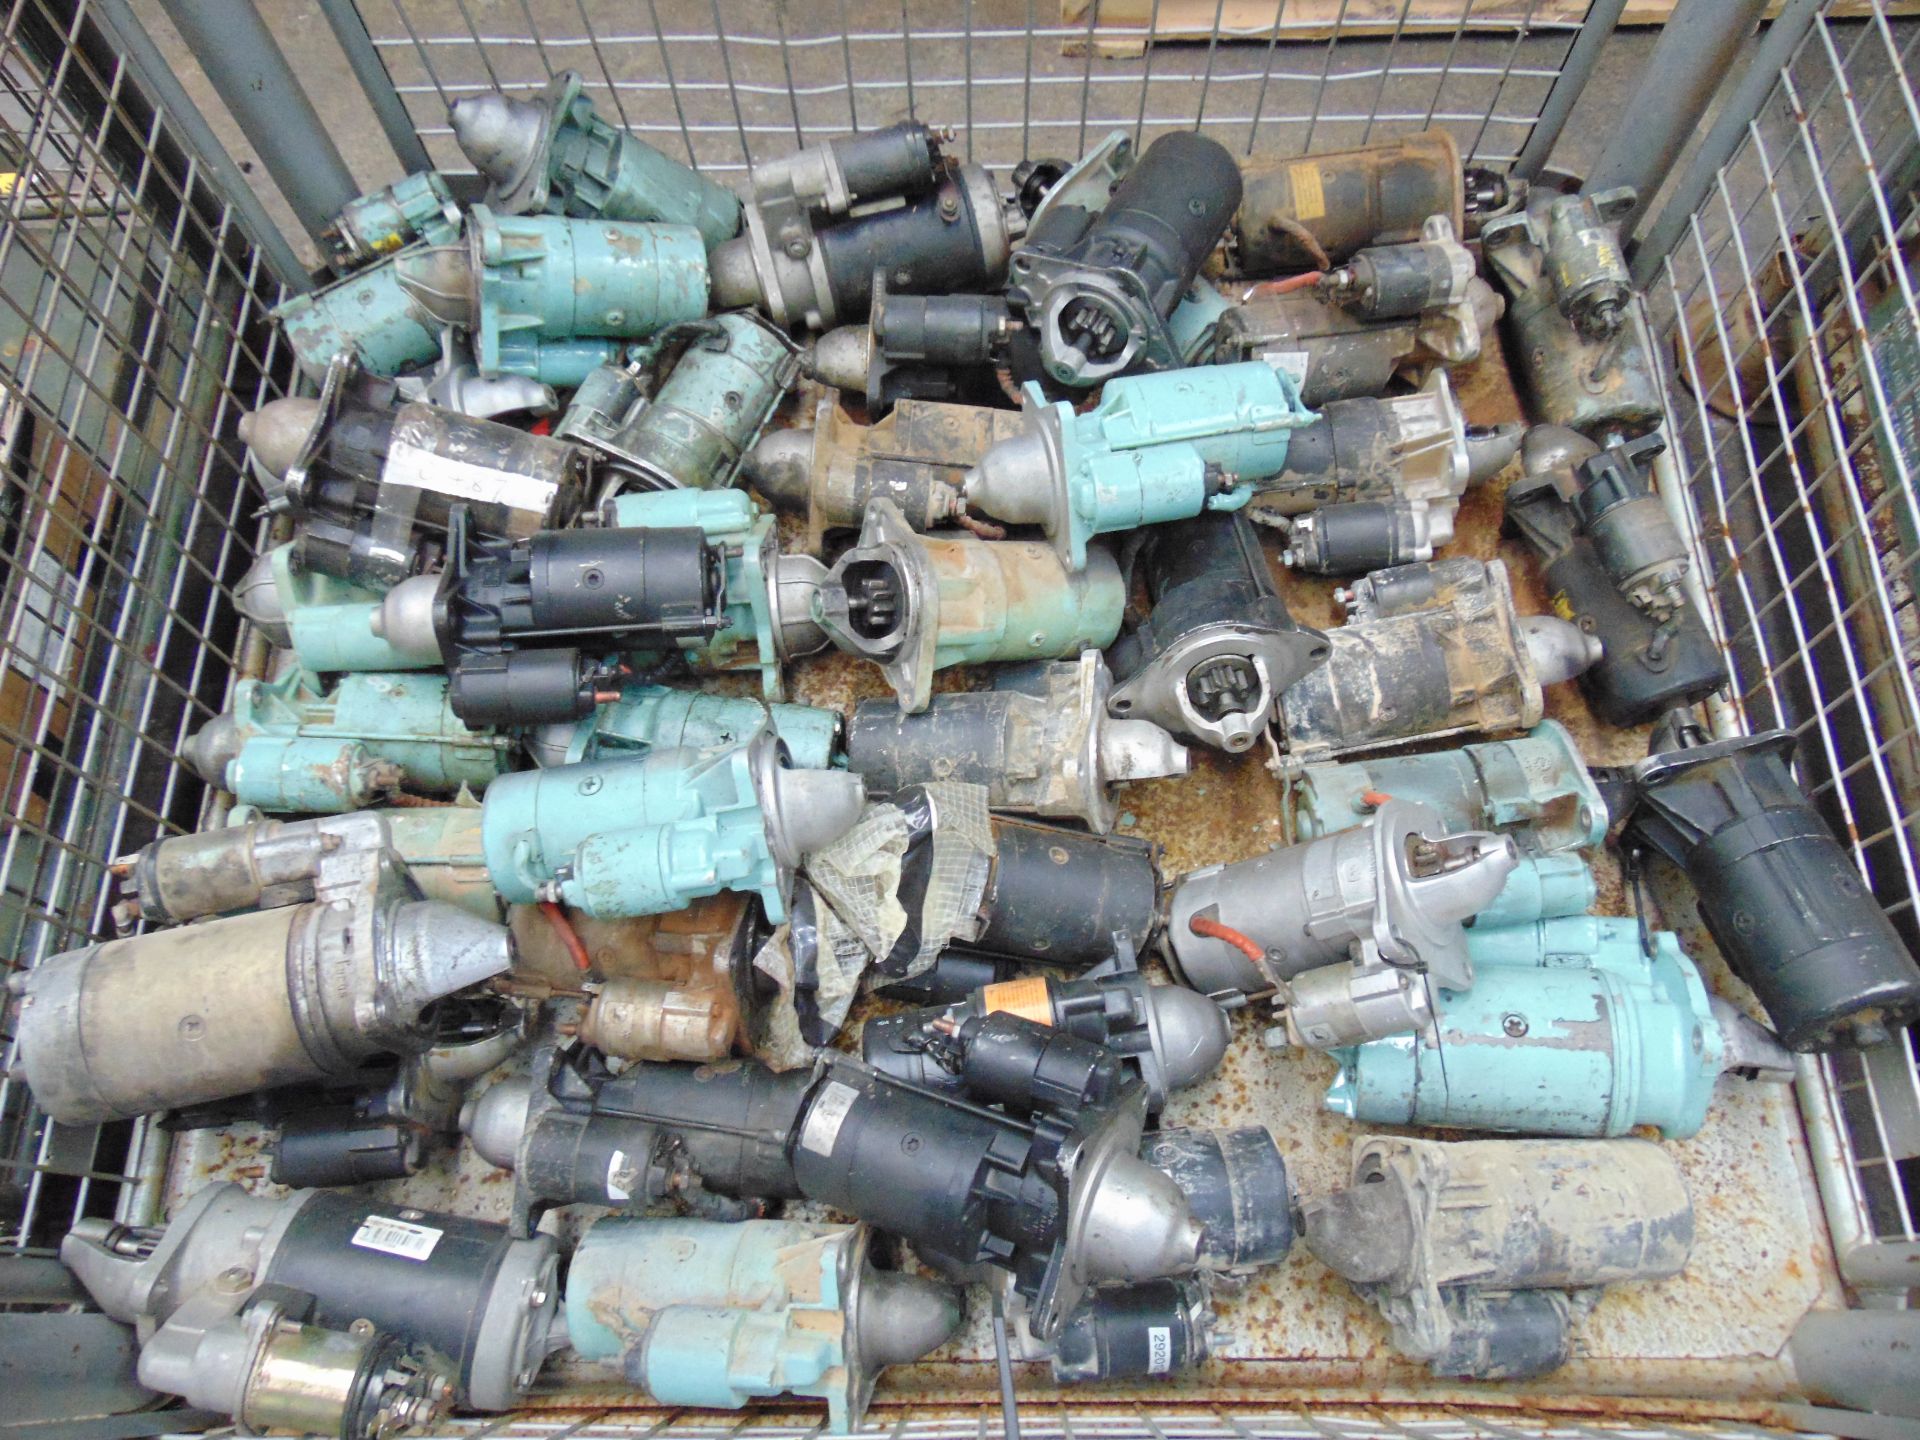 43 x Takeout Land Rover Starter Motors